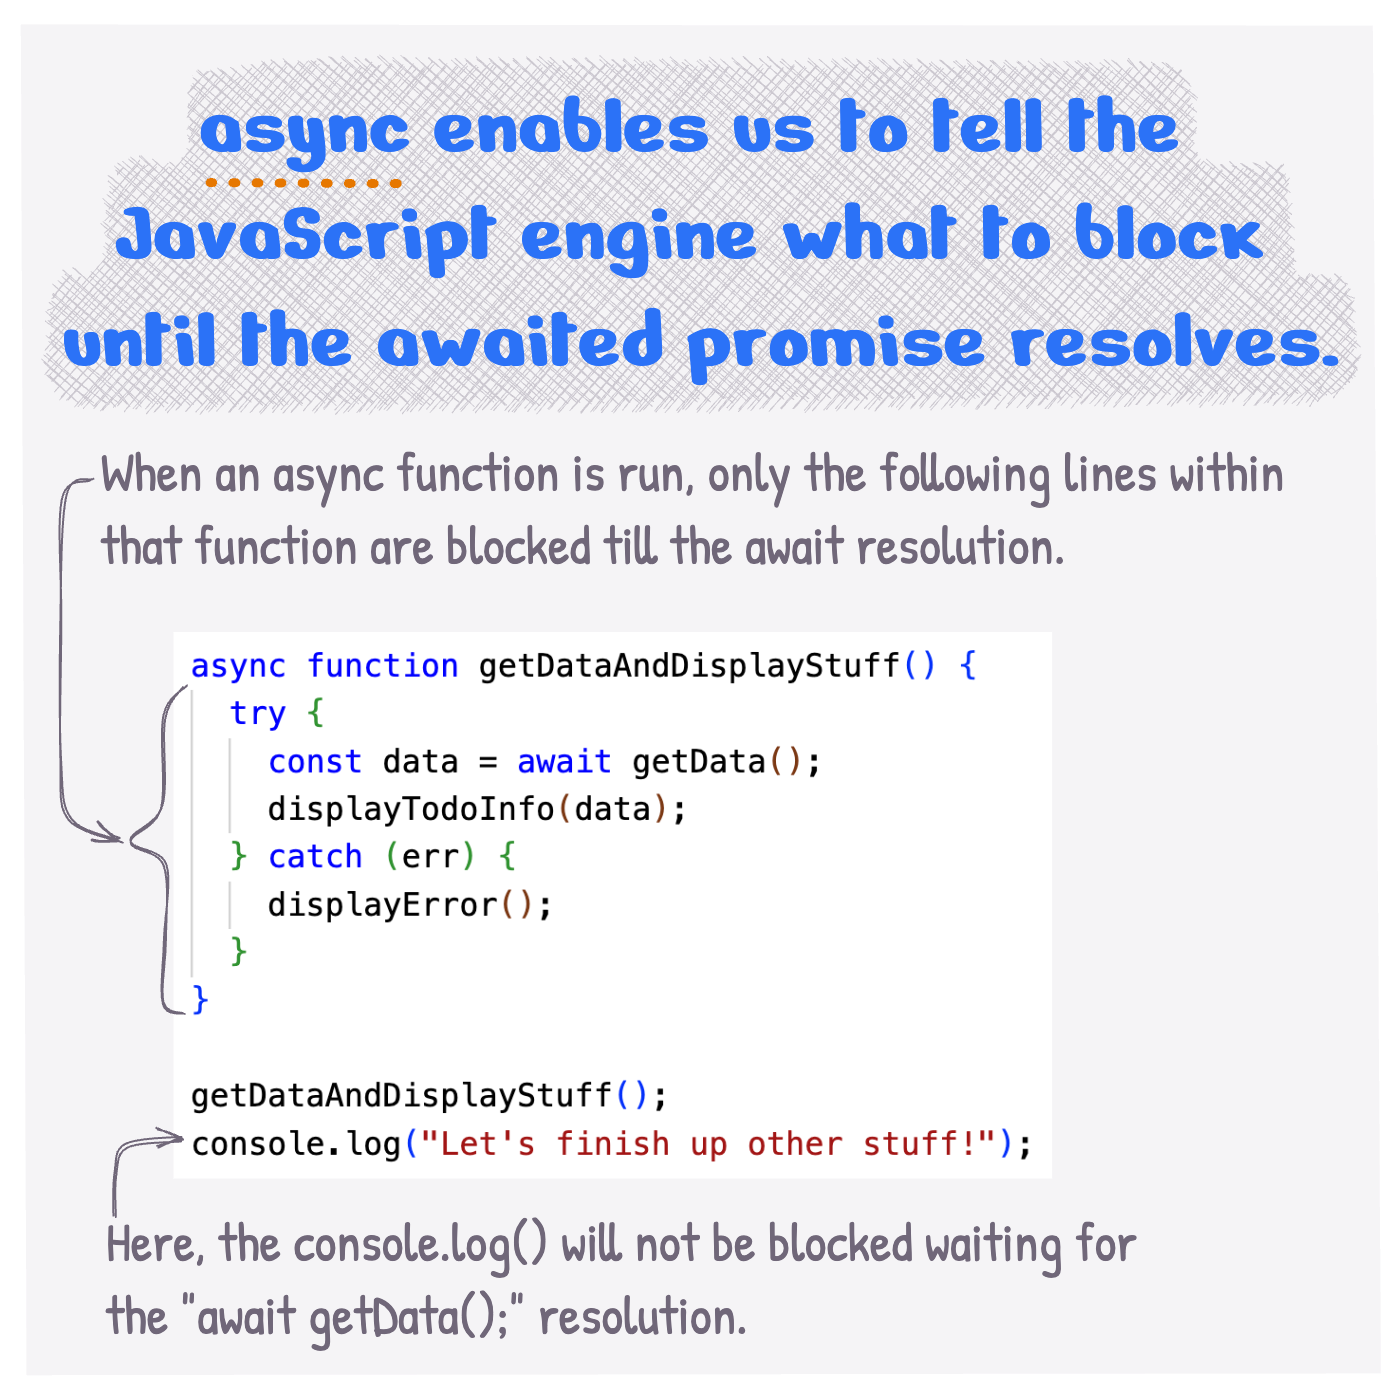 Async enables us to tell the JavaScript engine what to block until the awaited promise resolves.